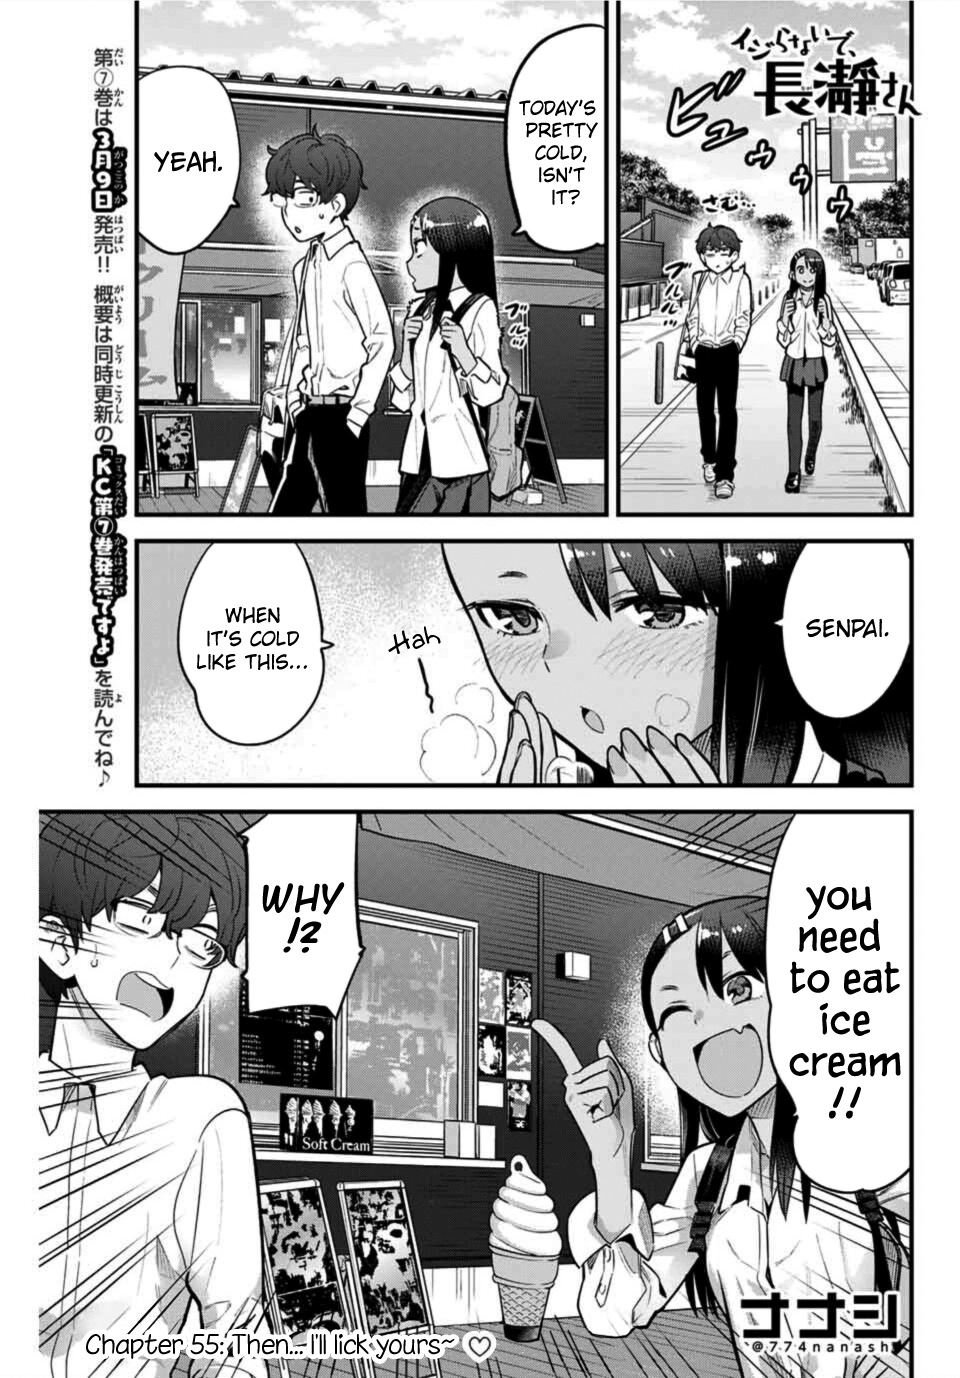 Ijiranaide, Nagatoro-San Vol.8 Chapter 55: Then... I'll Lick Yours~♡ - Picture 1